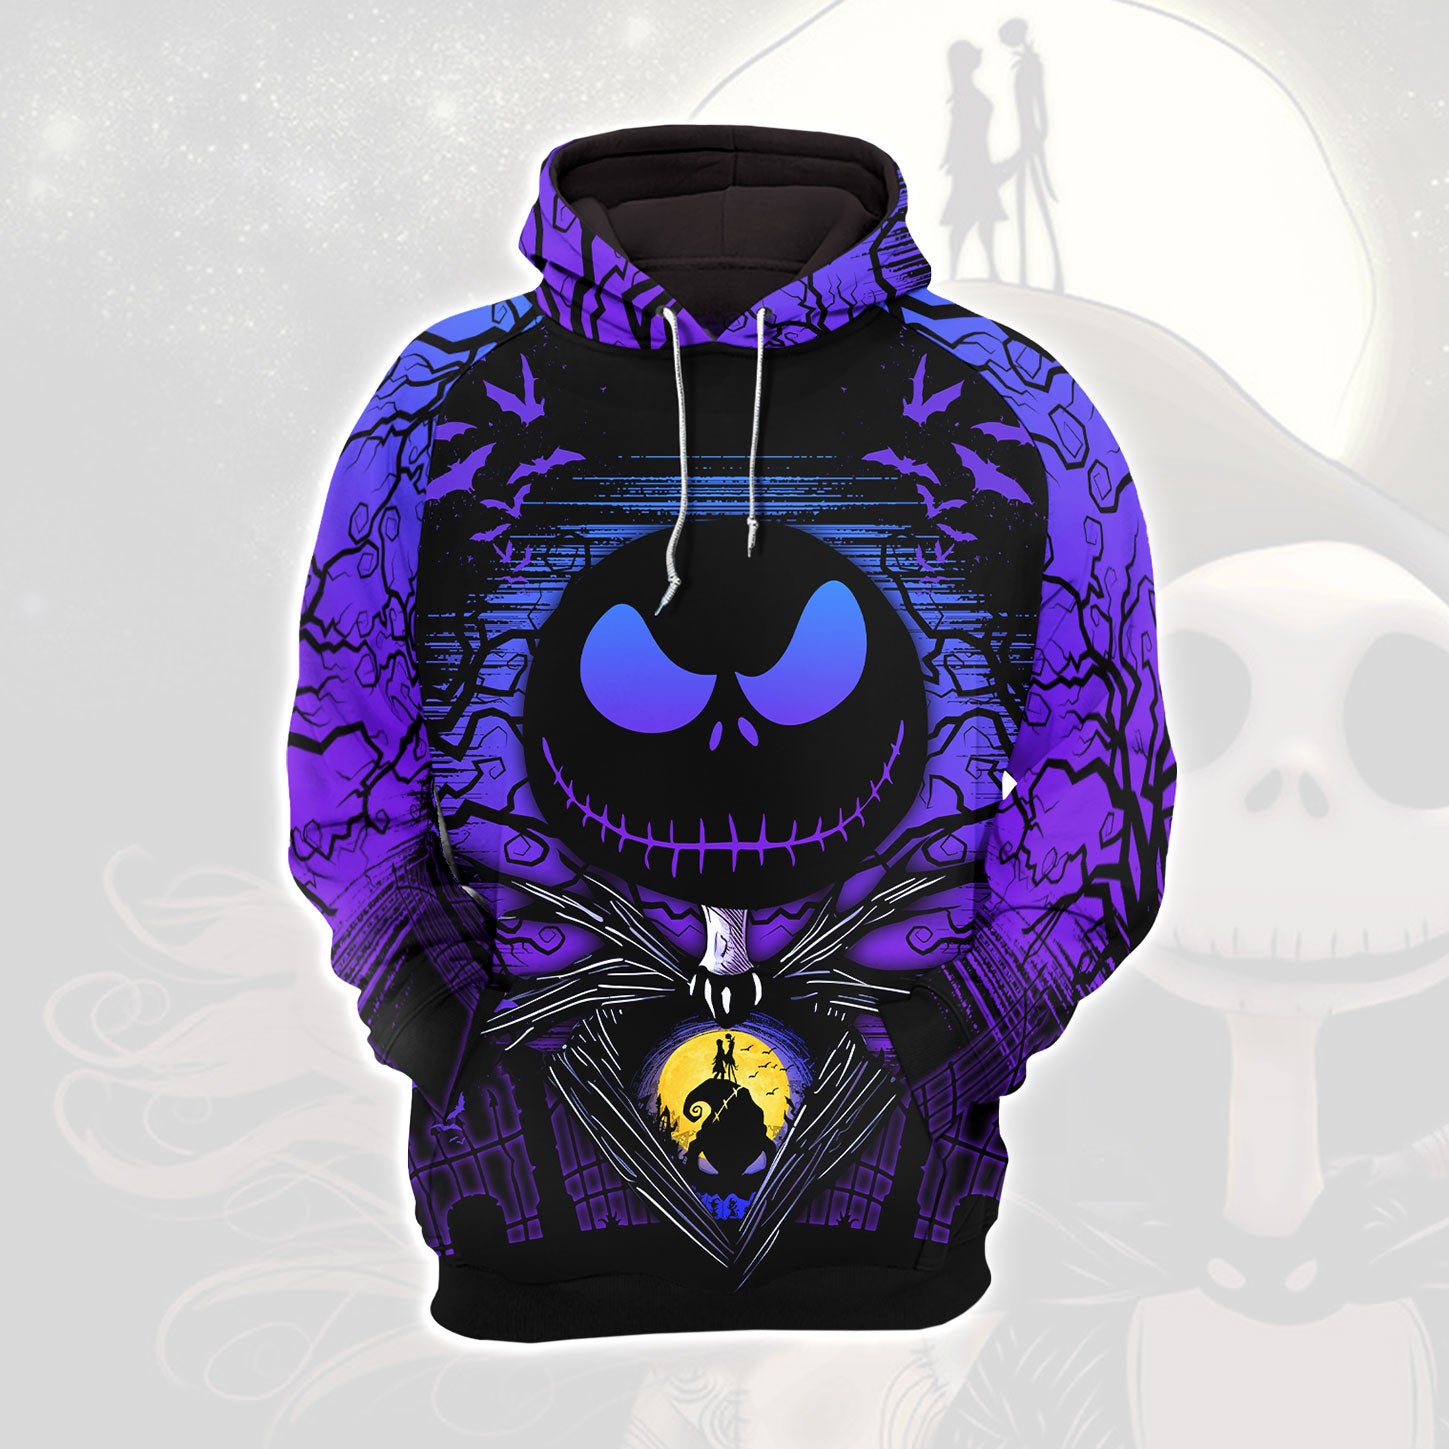 Dark Purple Nightmare Art Combo Hoodie and Leggings - Dark and edgy matching set with skull designs for a unique and stylish look